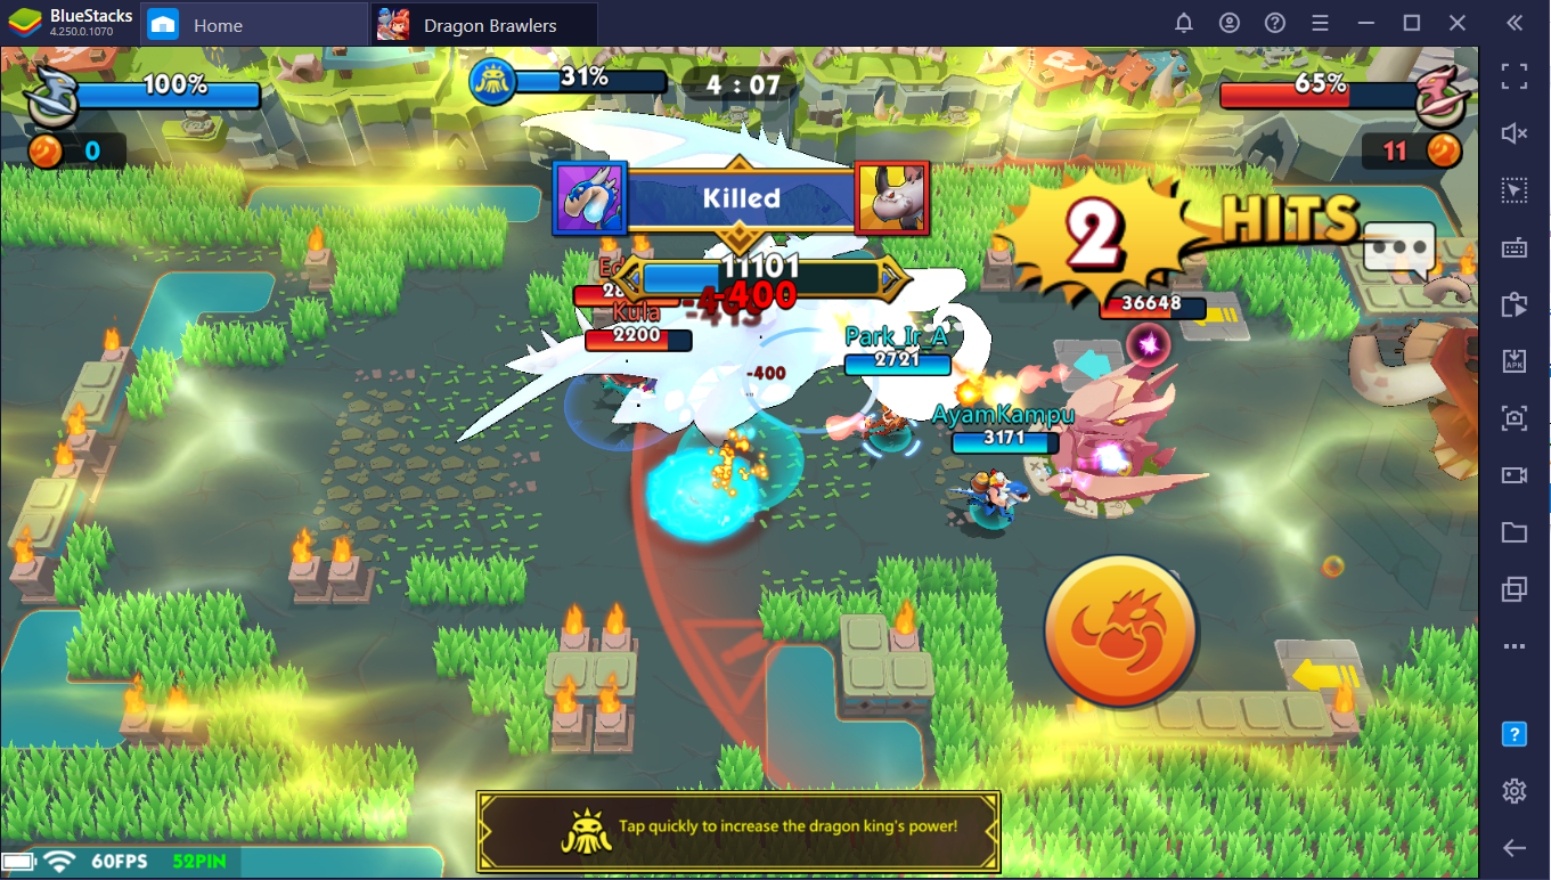 Beginner's Guide To Playing Dragon Brawlers